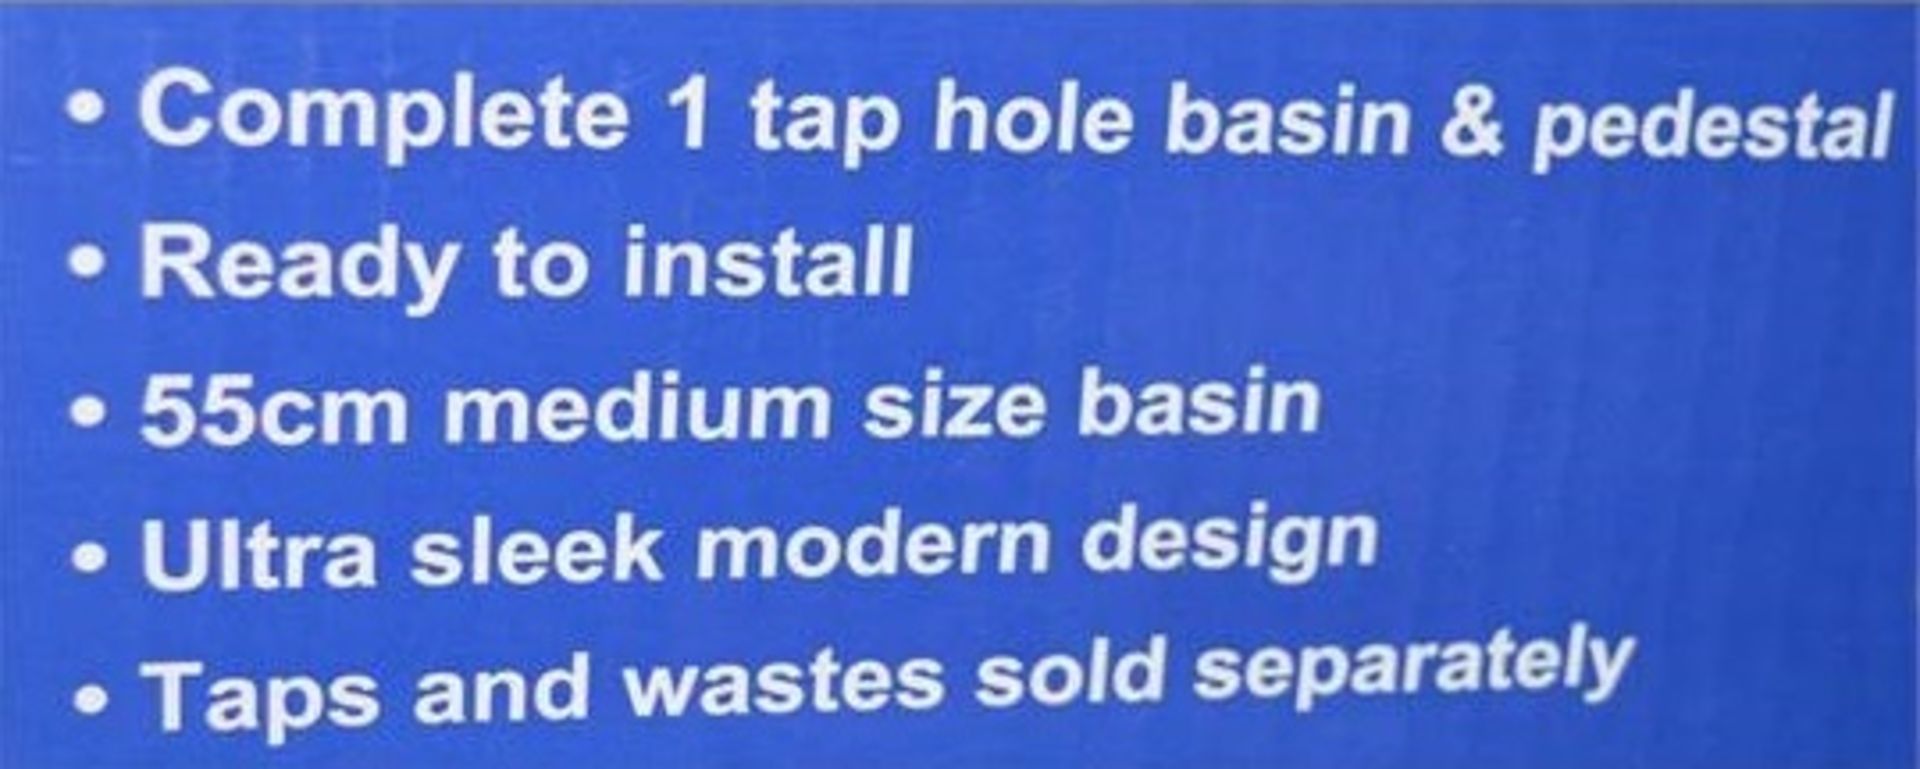 1 x Delux Xpress 1 Tap Hole 550mm Bathroom Sink Basin with Pedestal - Brand New and Boxed - Ultra - Image 4 of 4